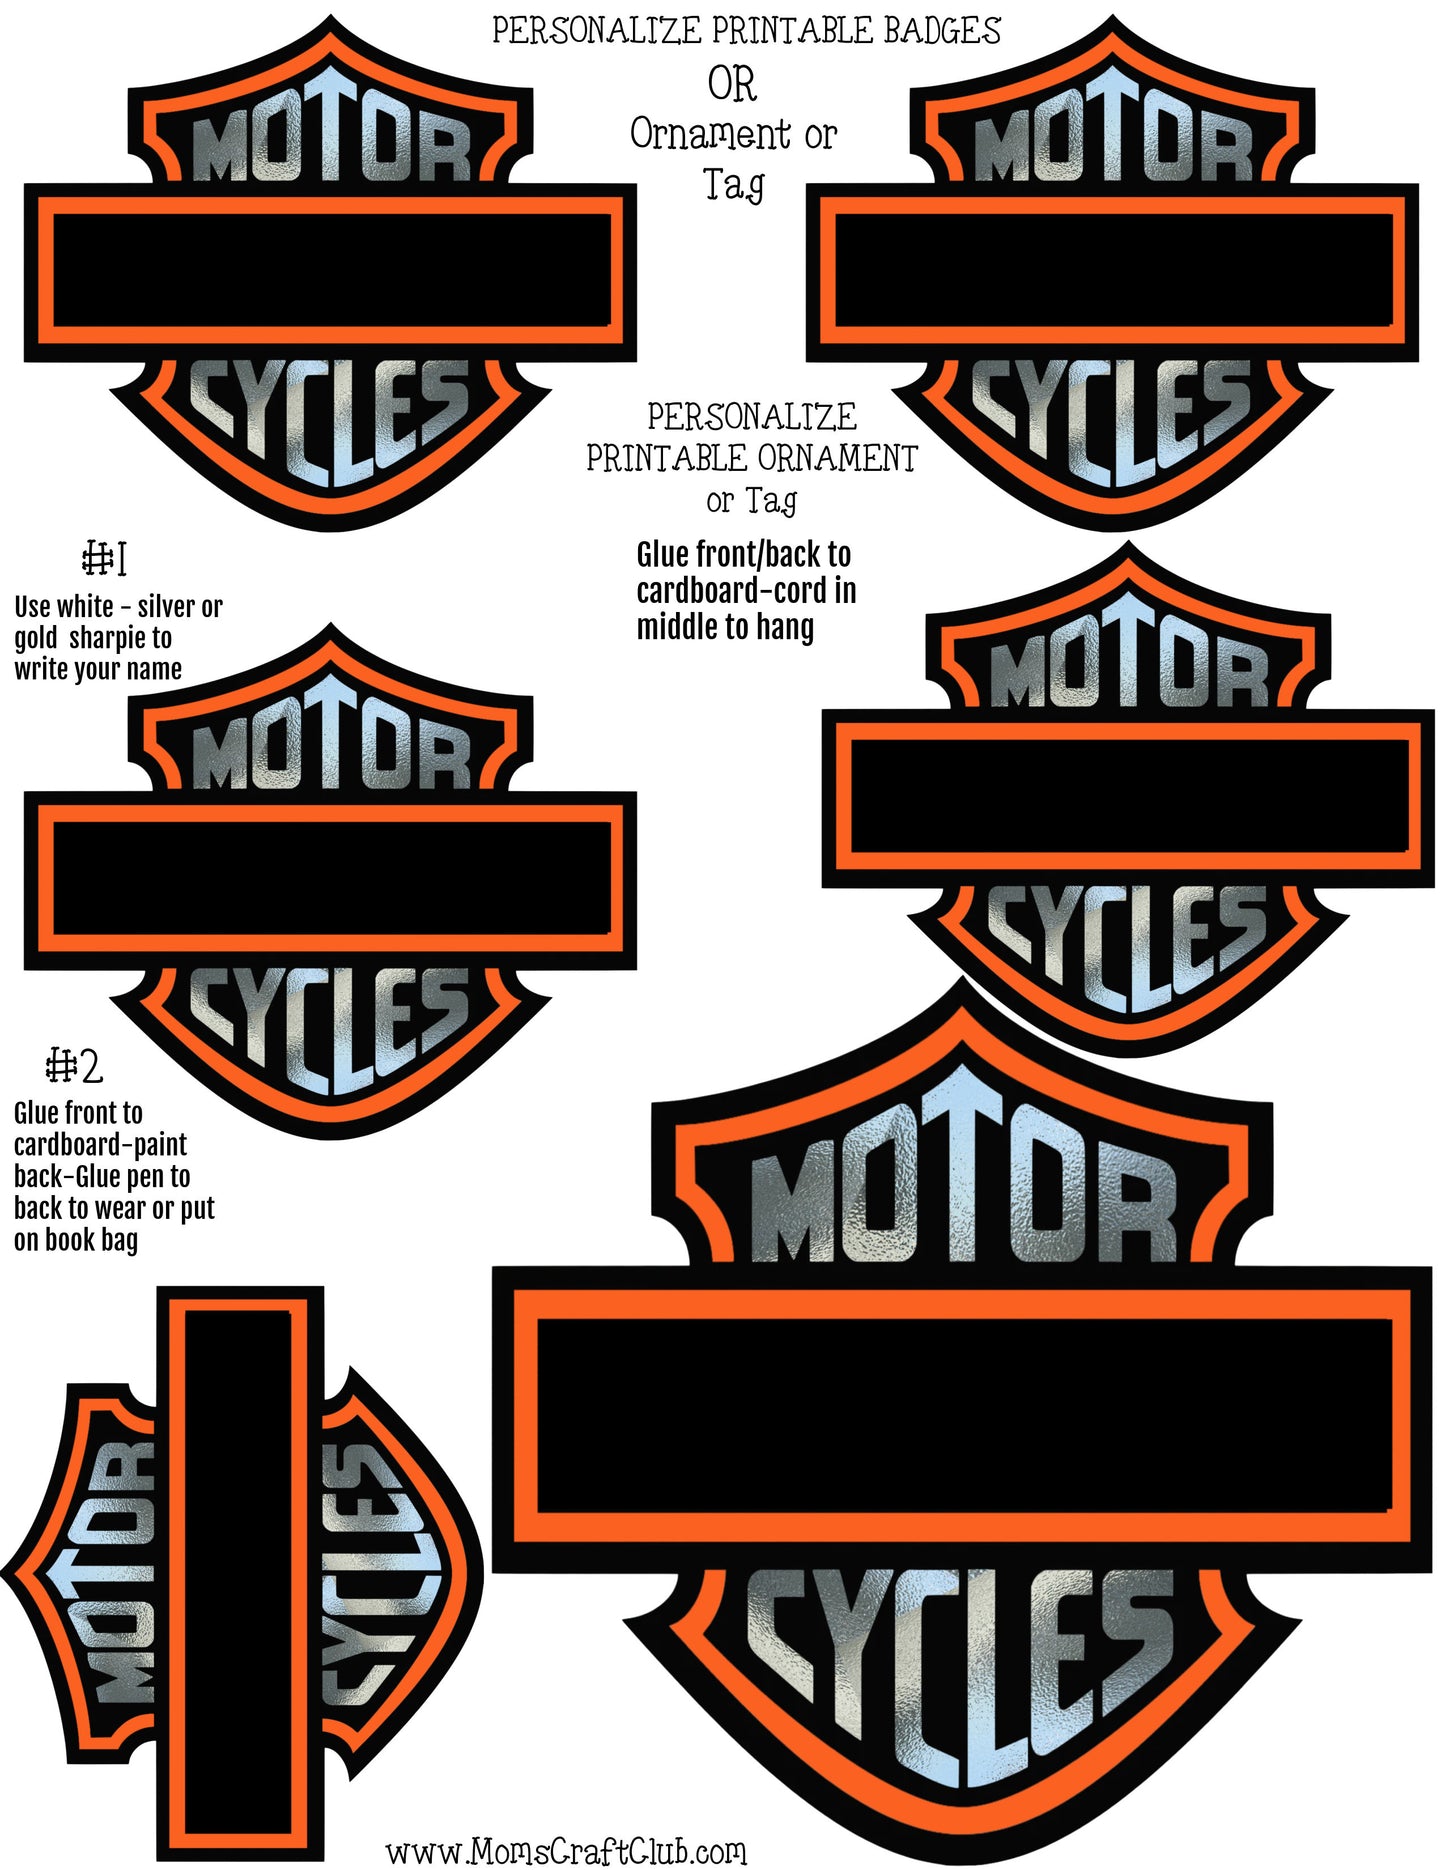 Motorcycle Personalize badges - Tags or Ornament - Orange - EASY 1 PAGE CRAFT